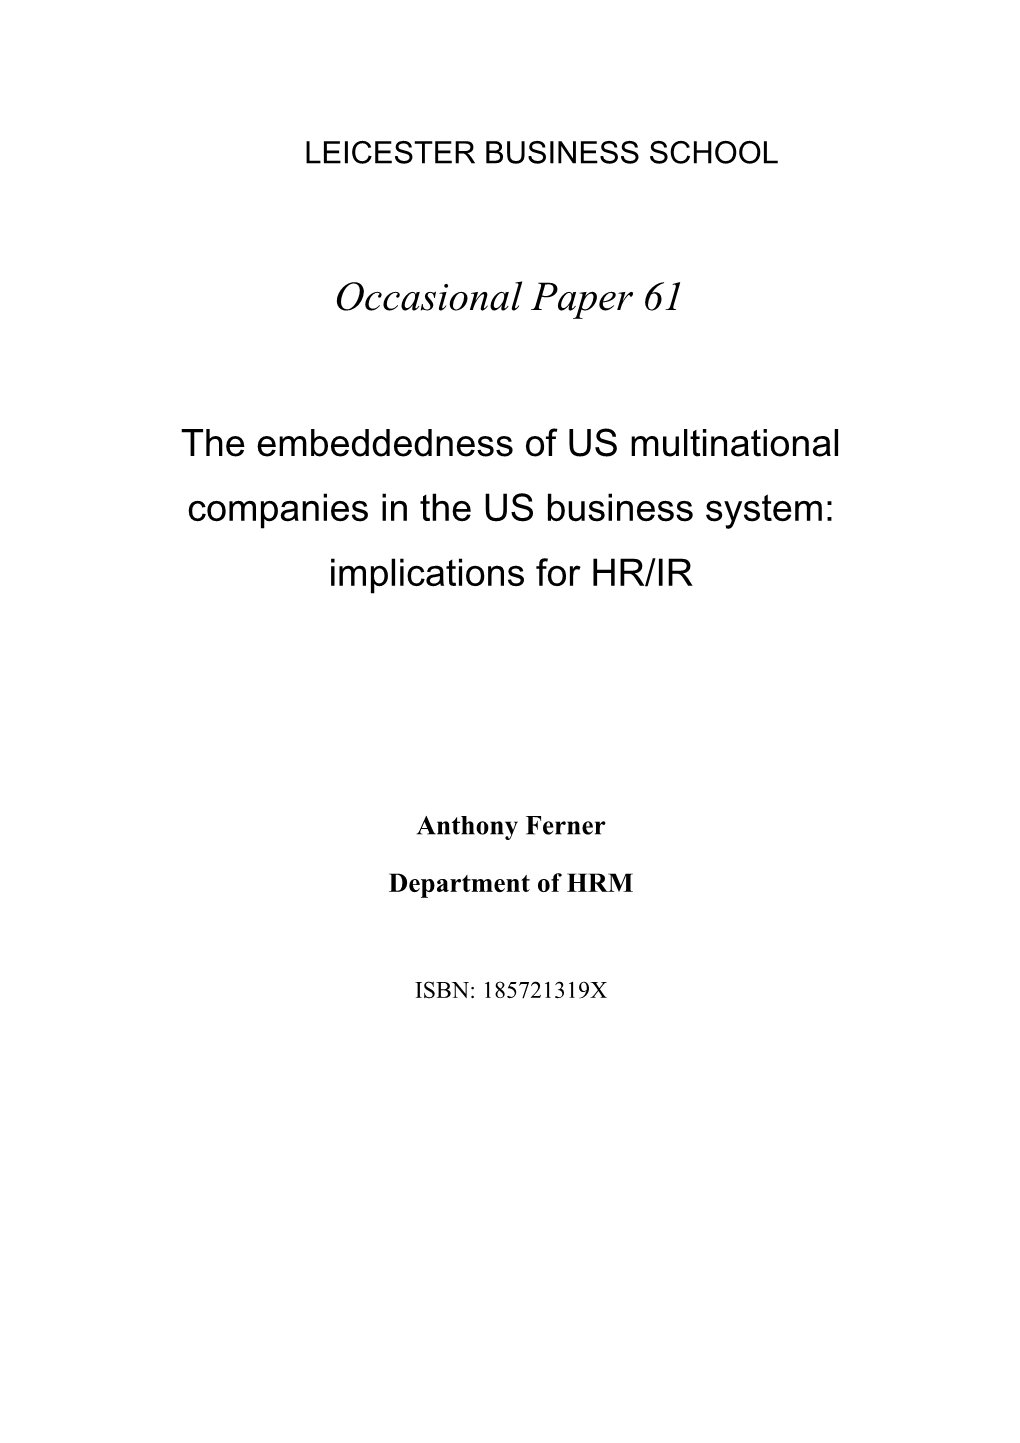 The Embeddedness of US Multinational Companies in the US Business System: Implications for HR/IR